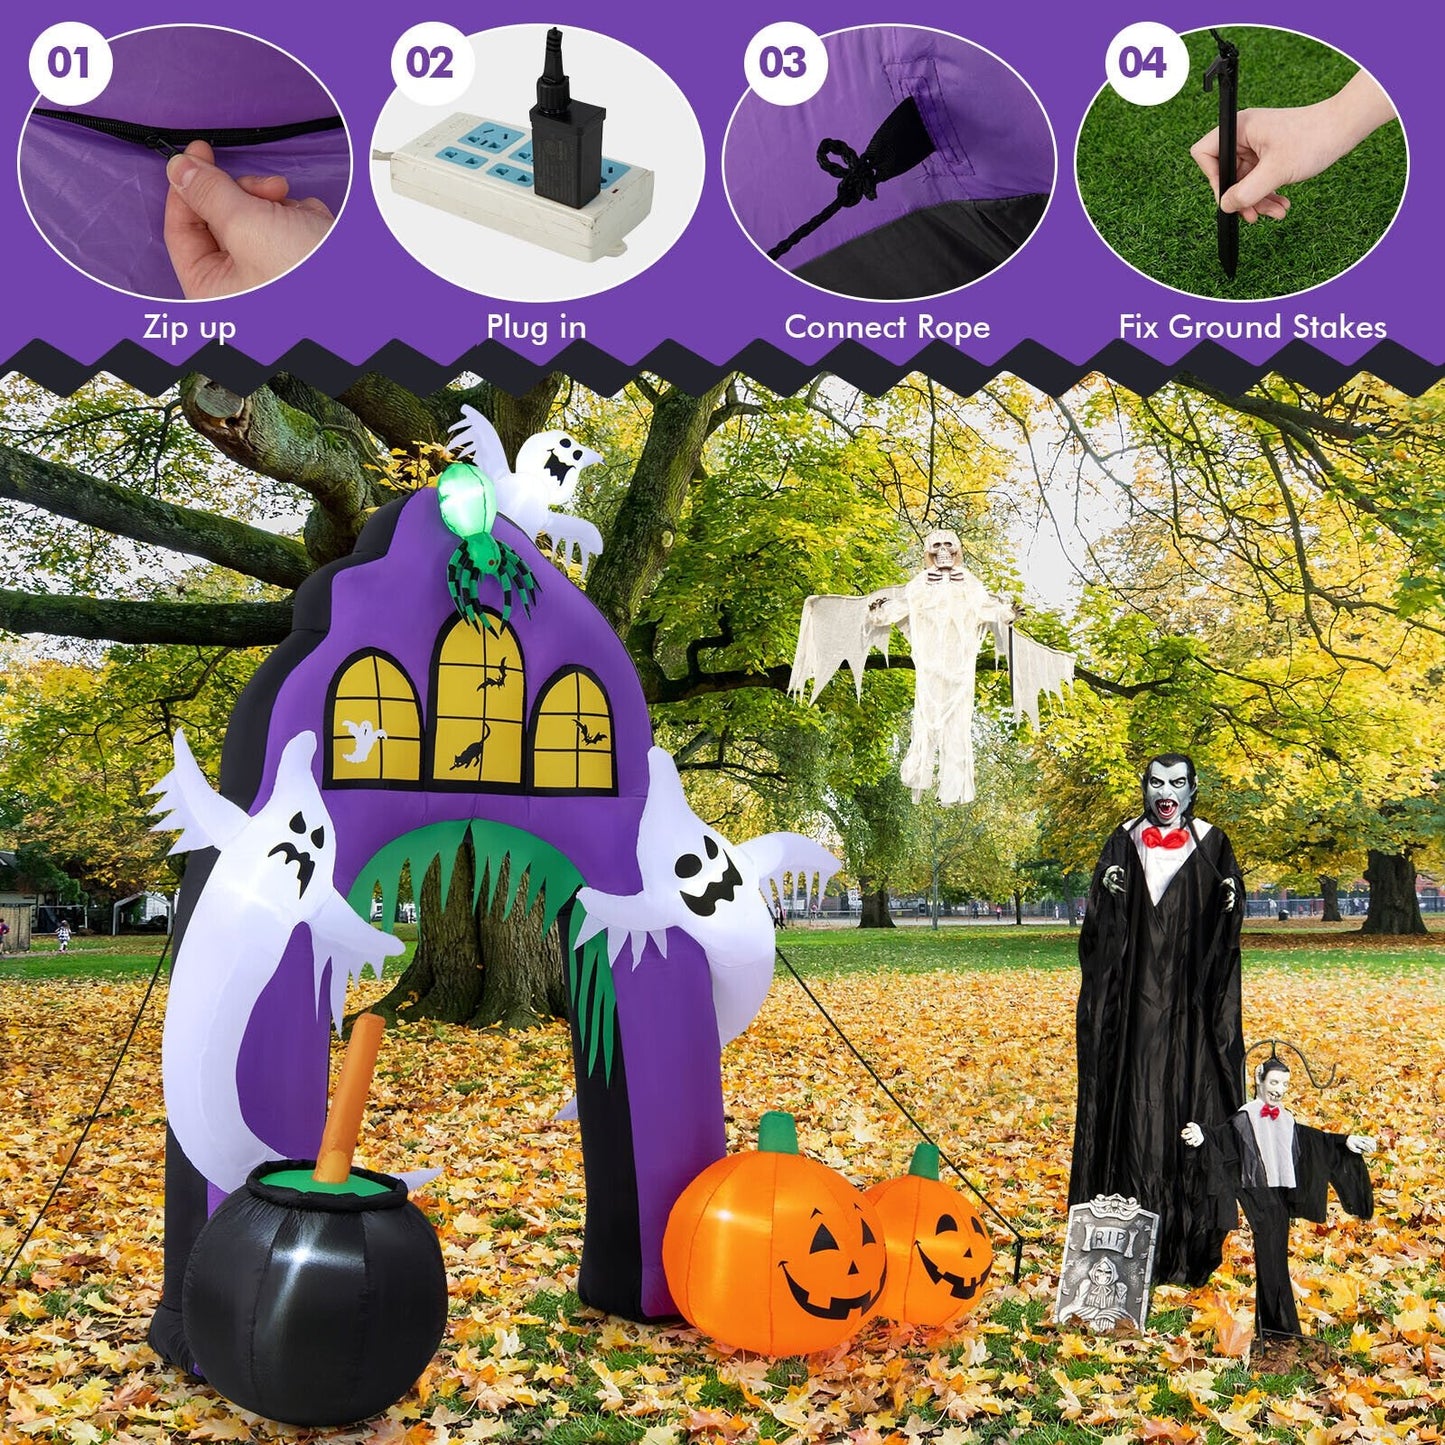 9 Feet Tall Halloween Inflatable Castle Archway Decor with Spider Ghosts and Built-in, Purple